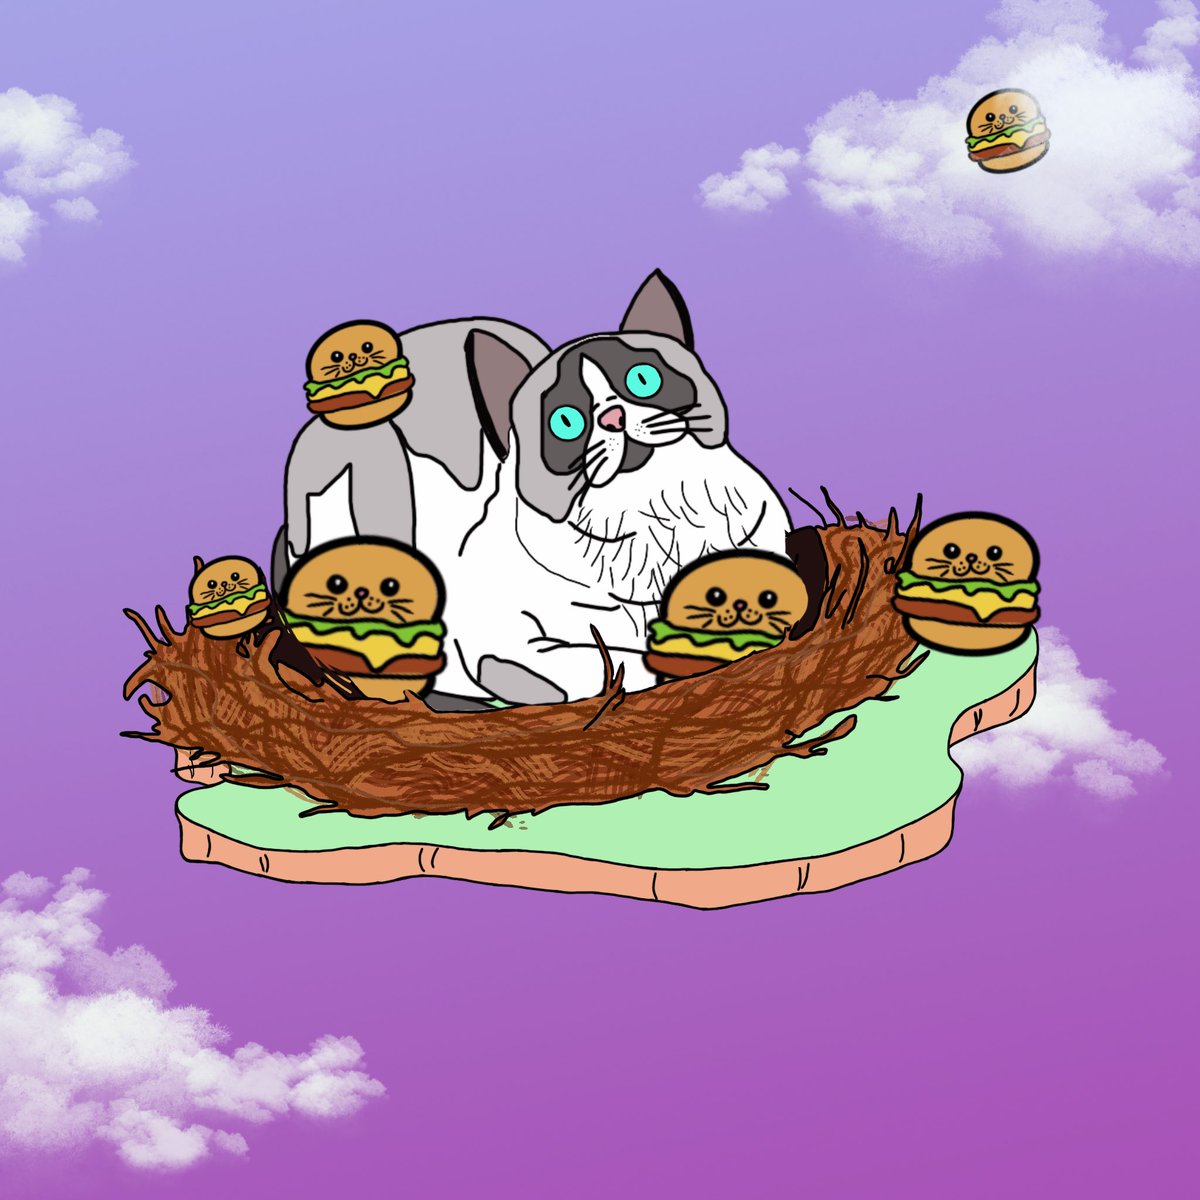 Happy Thursday!🫶🏼

Have you ever seen a cat brooding burgers?👀🍔

Available on @opensea 

1/1

#Crypto #nftartforsale #nftpolygon #thursdaymorning #nftcollectible